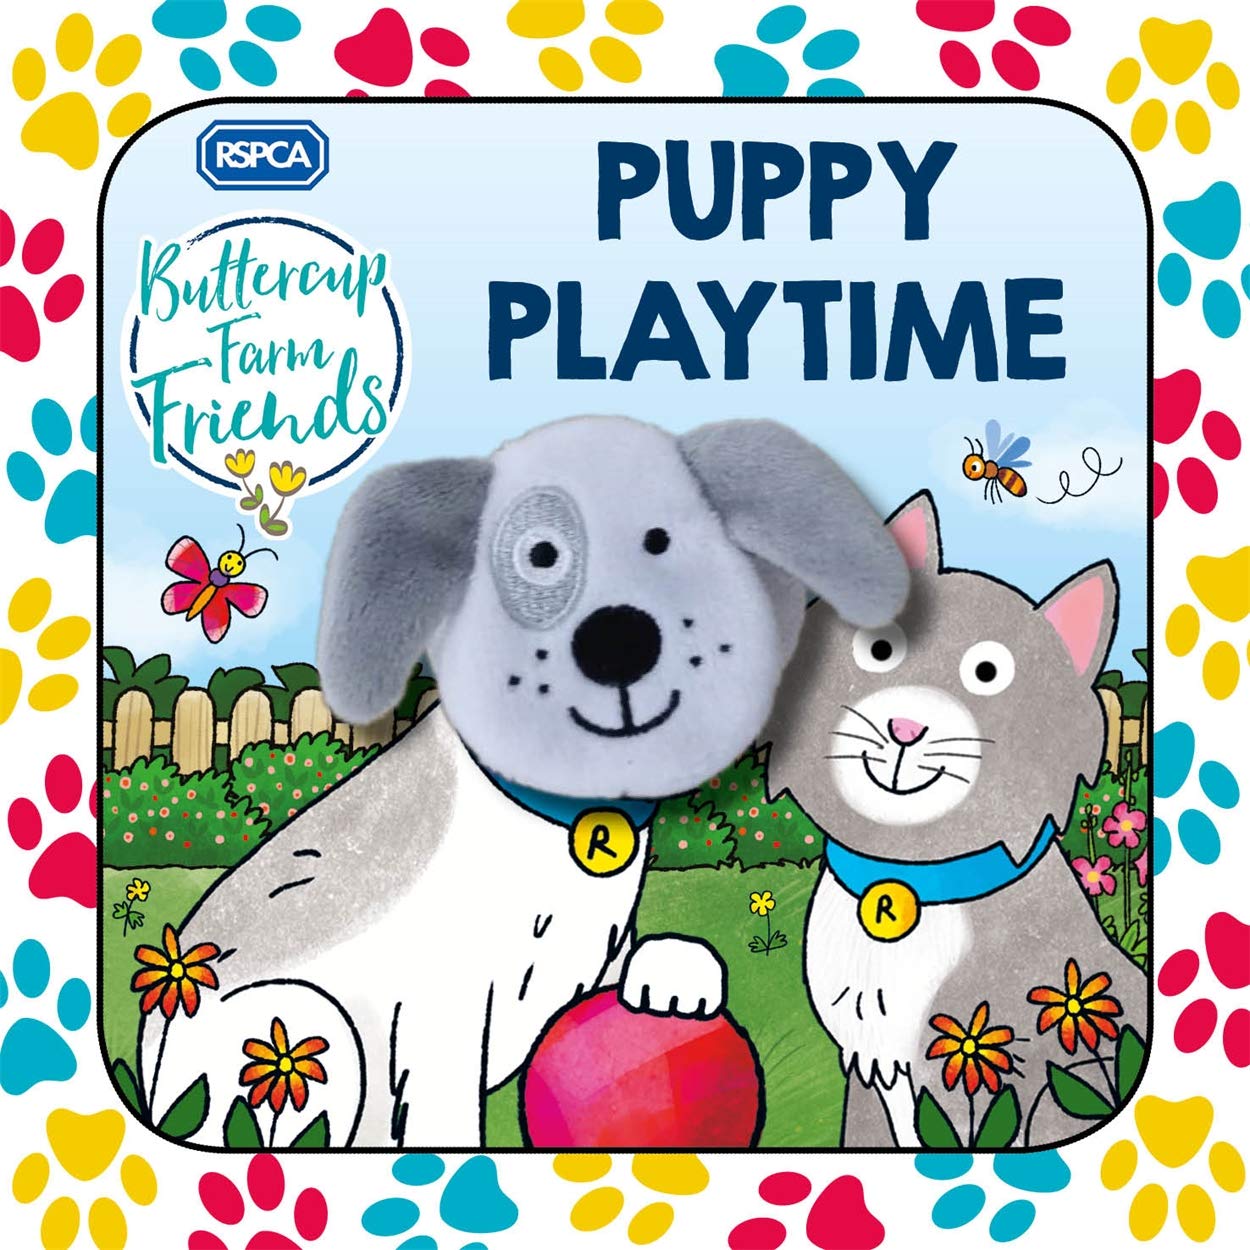 Puppy Playtime RSPCA Buttercup Farm Friends (Board Finger Puppet Book)